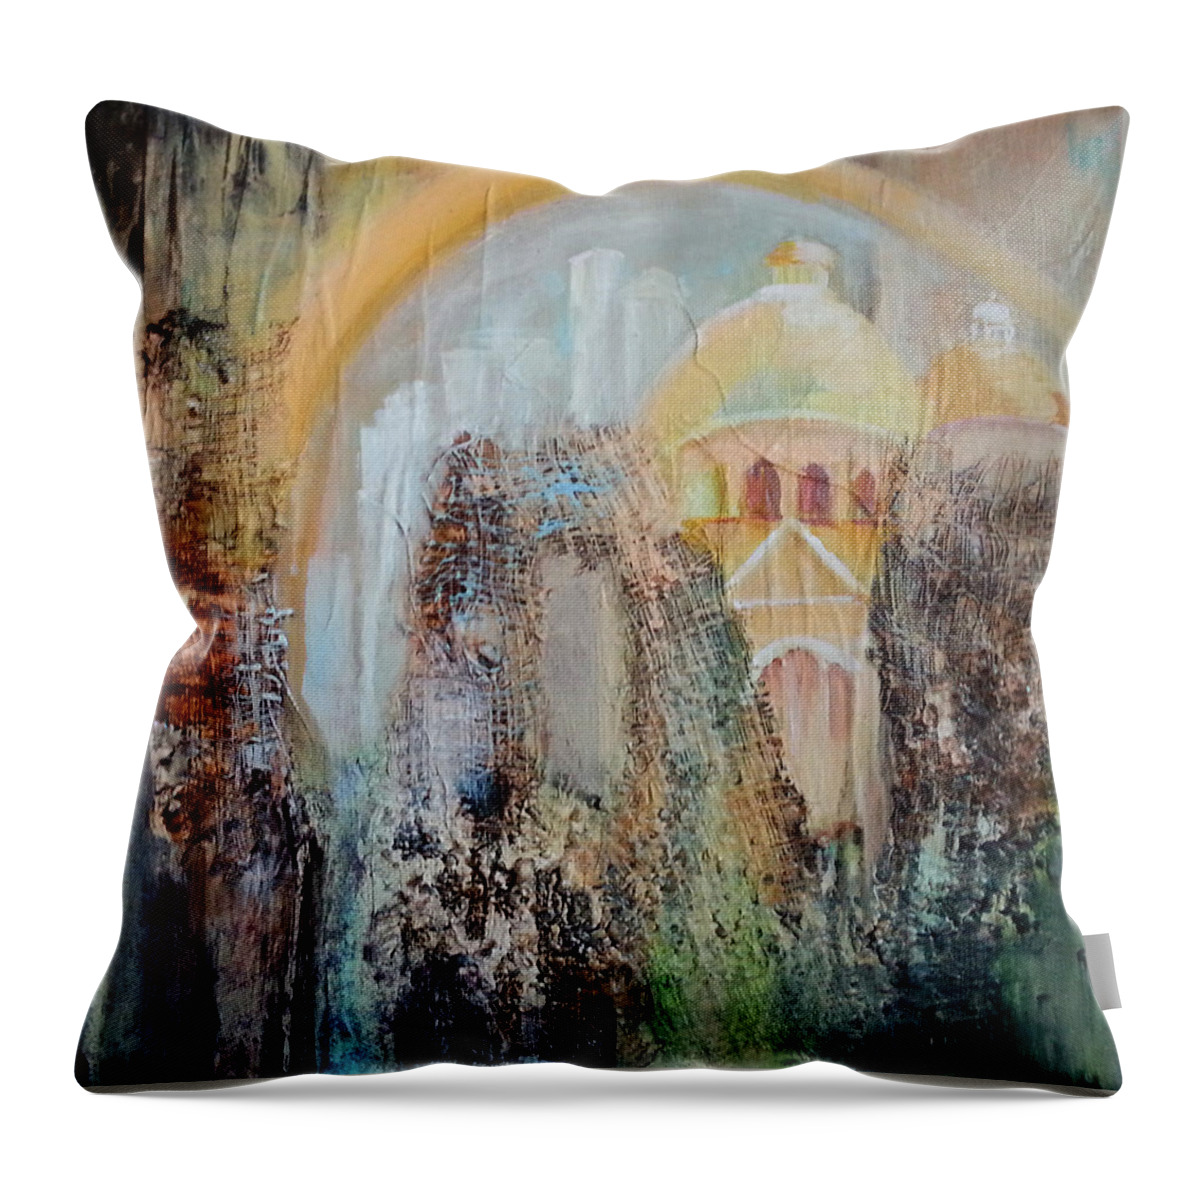 Modern Throw Pillow featuring the painting Abstract No.13 by Florentina Maria Popescu